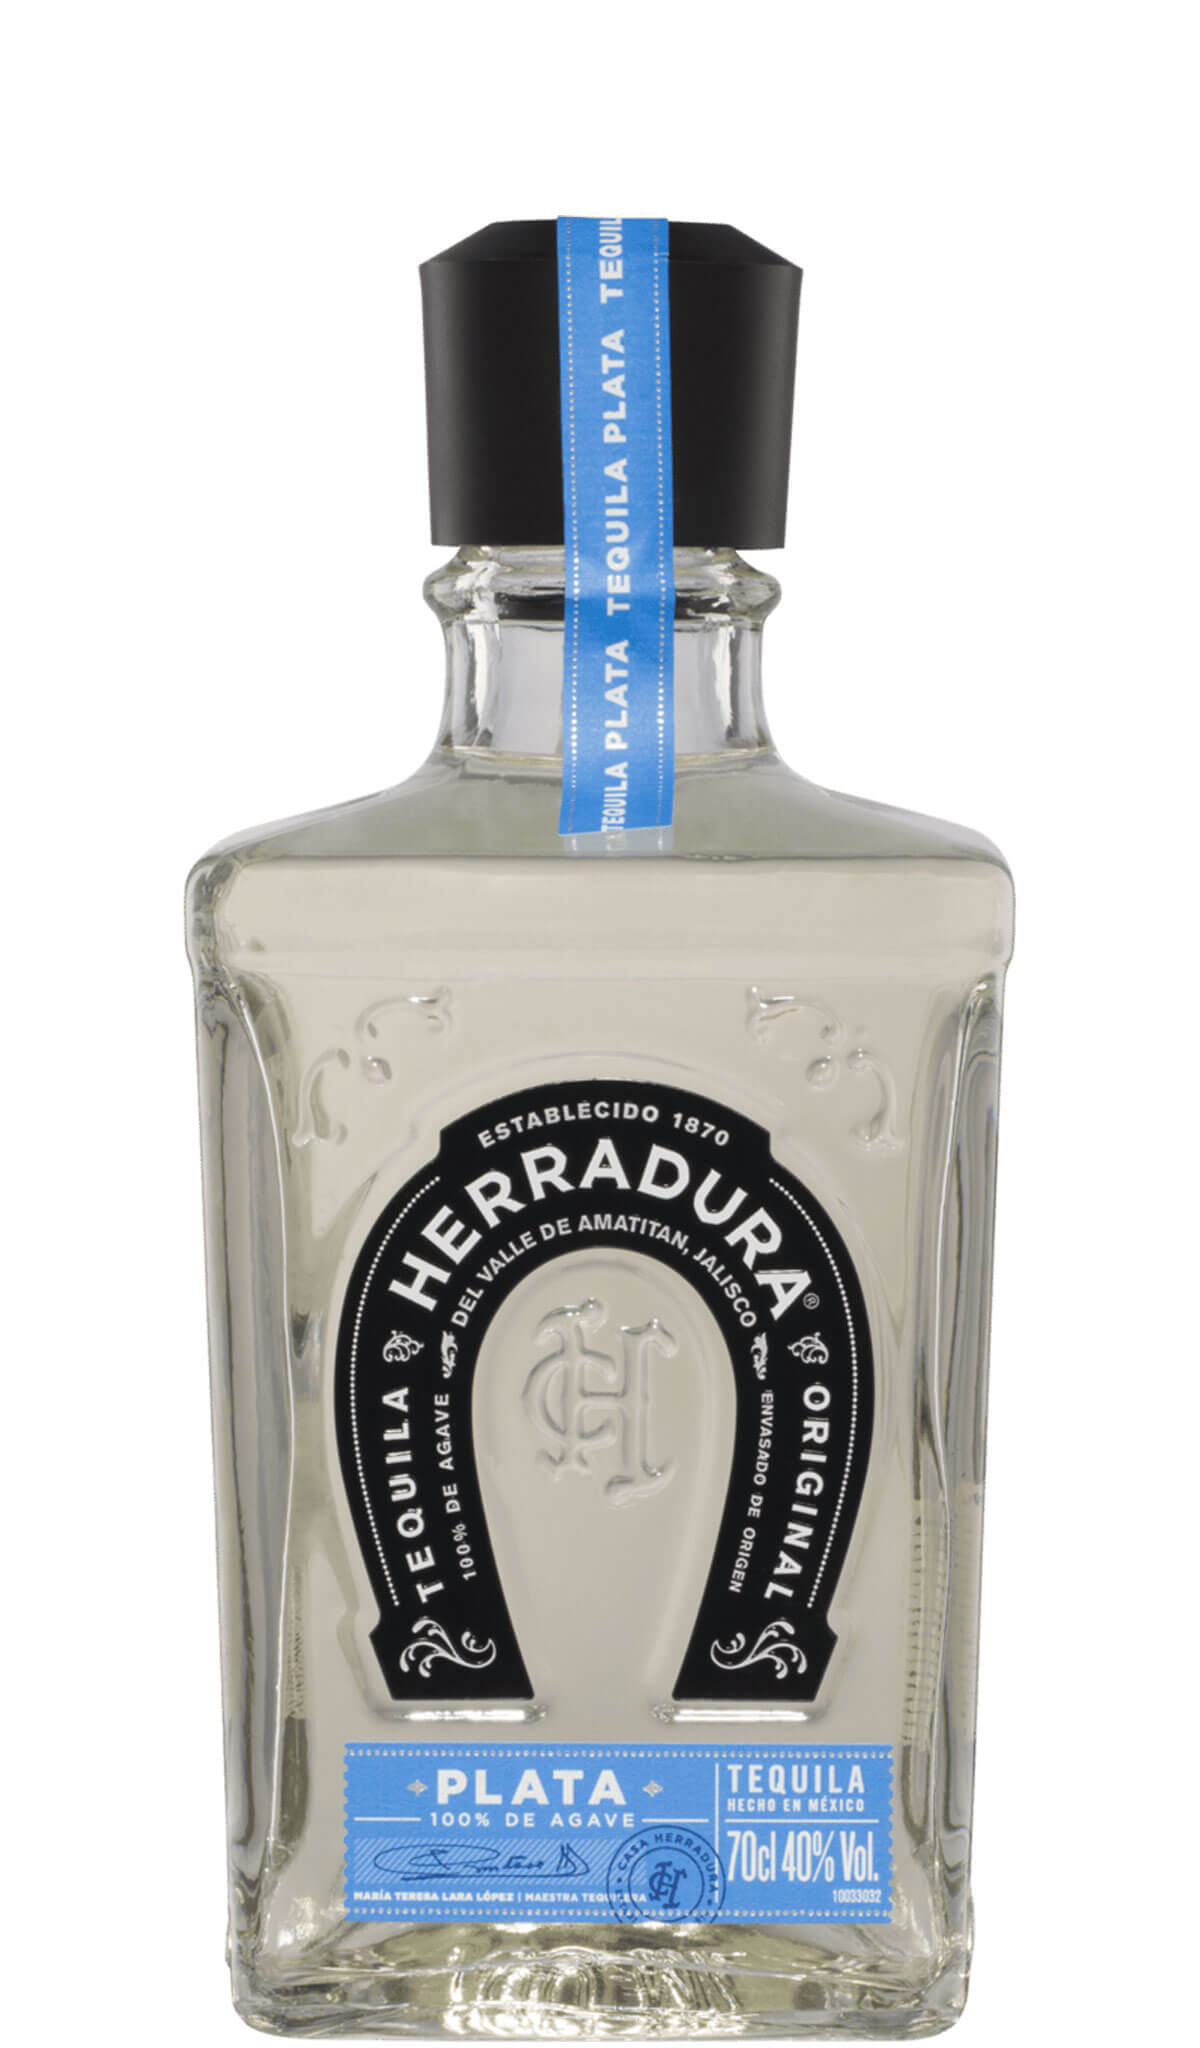 Find out more, explore the range and buy Herradura Plata 100% De Agave Tequila 700ml available online at Wine Sellers Direct - Australia's independent liquor specialists.